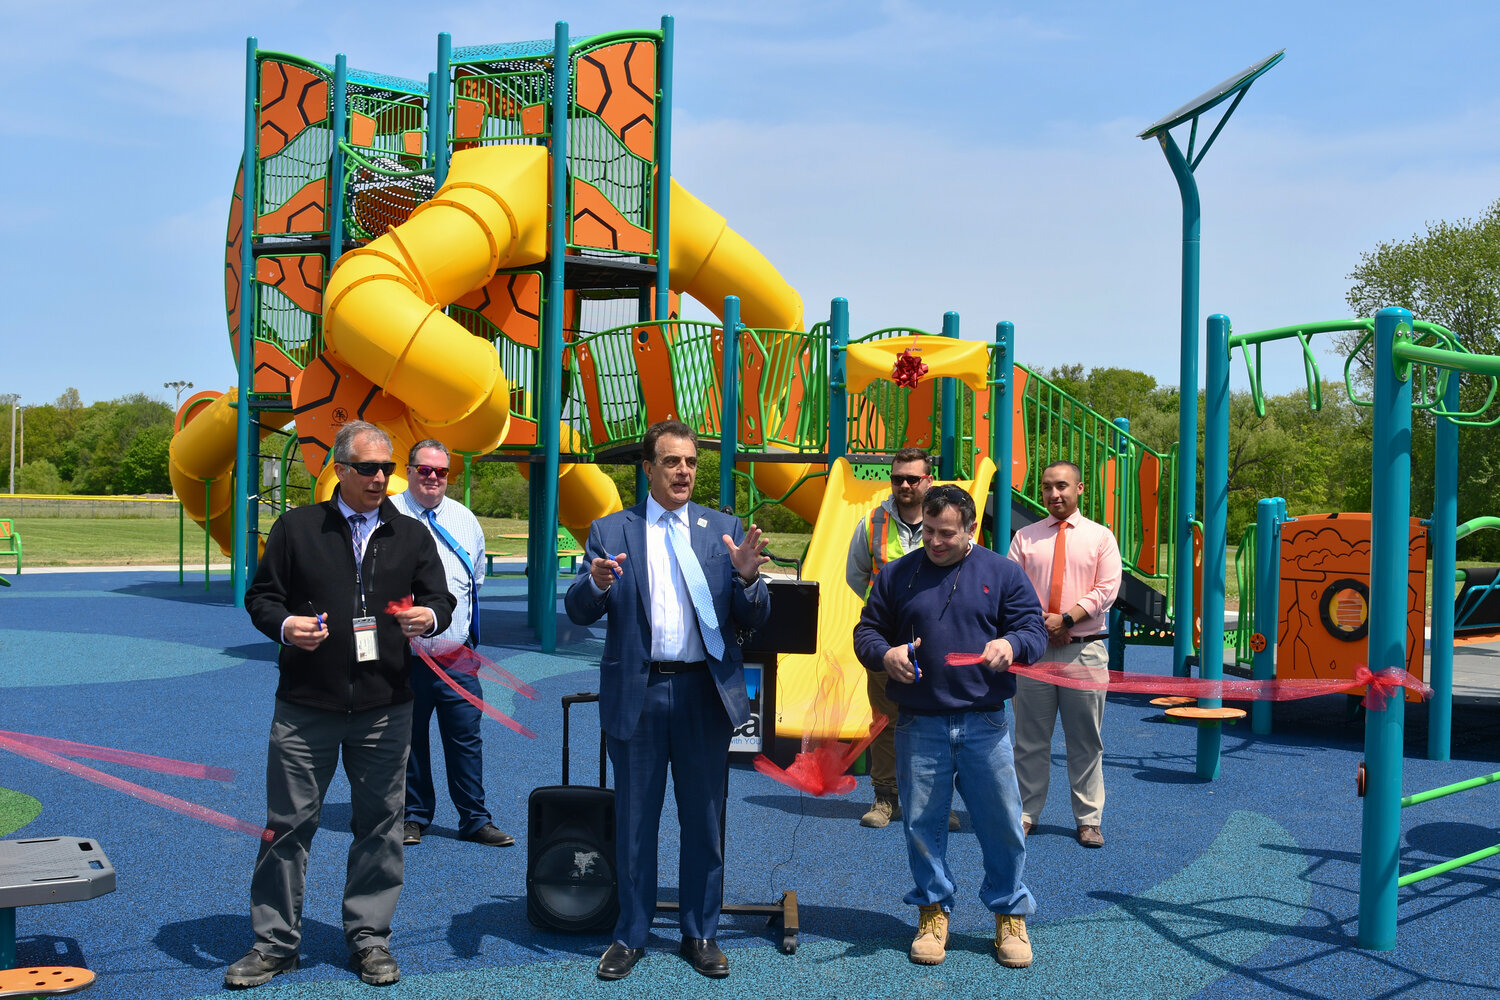 Utica city officials cut the ribbon at the newly-built inclusive playground at T.R. Proctor Park.